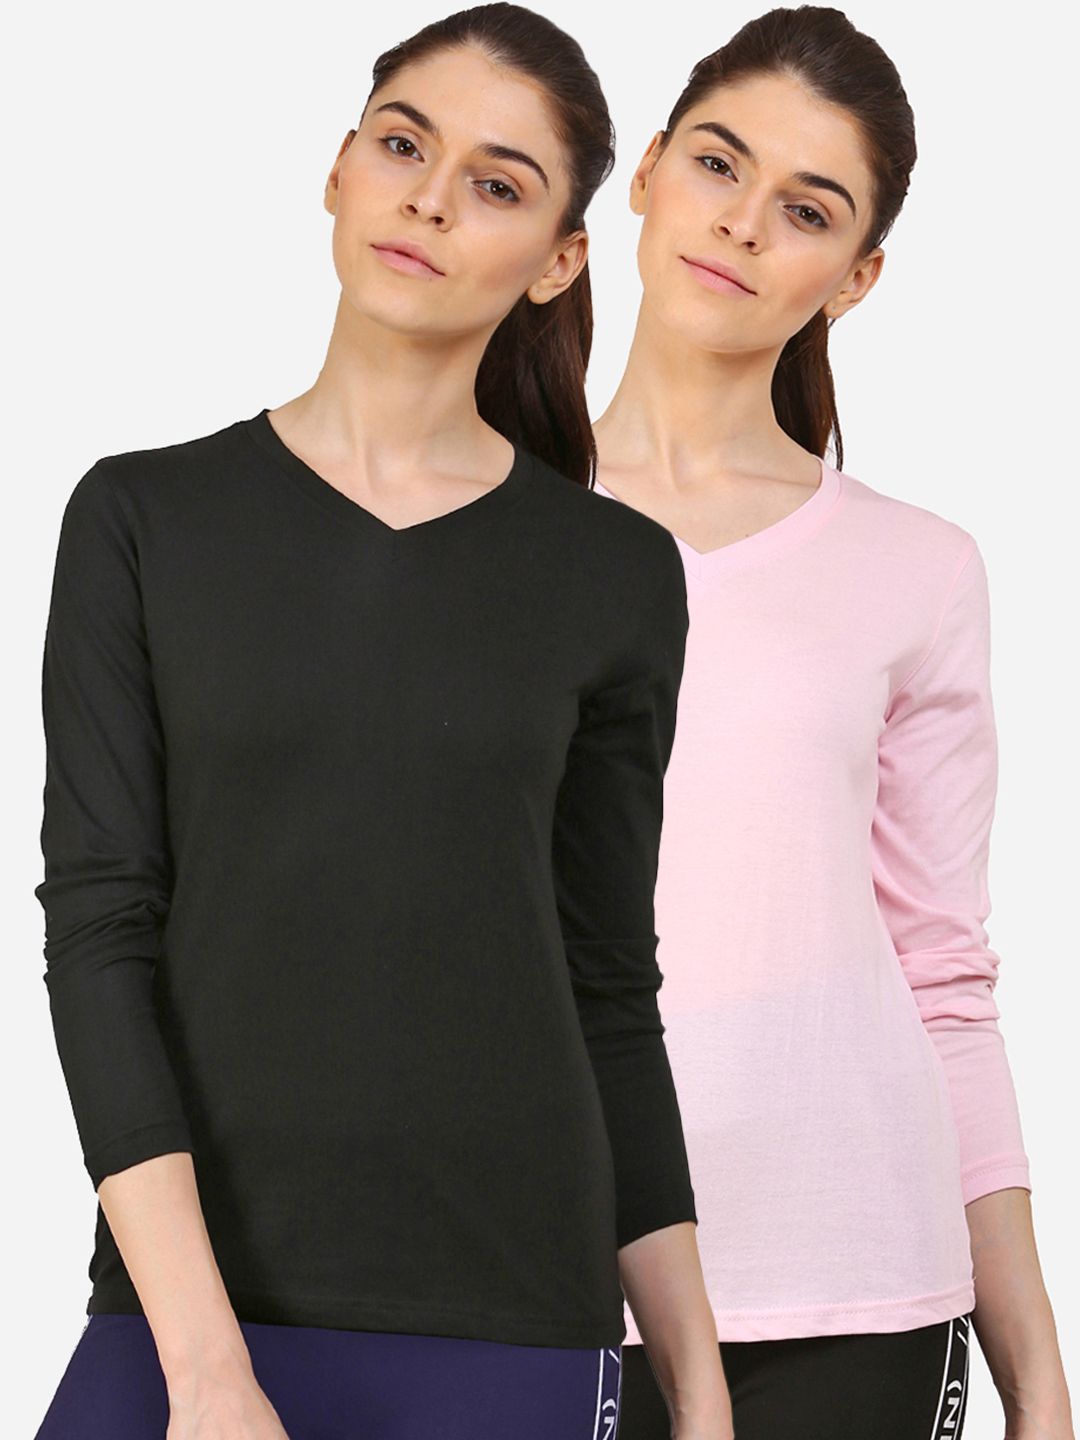 appulse Women Pack Of 2 Black & Pink V-Neck Slim Fit Running T-shirt Price in India